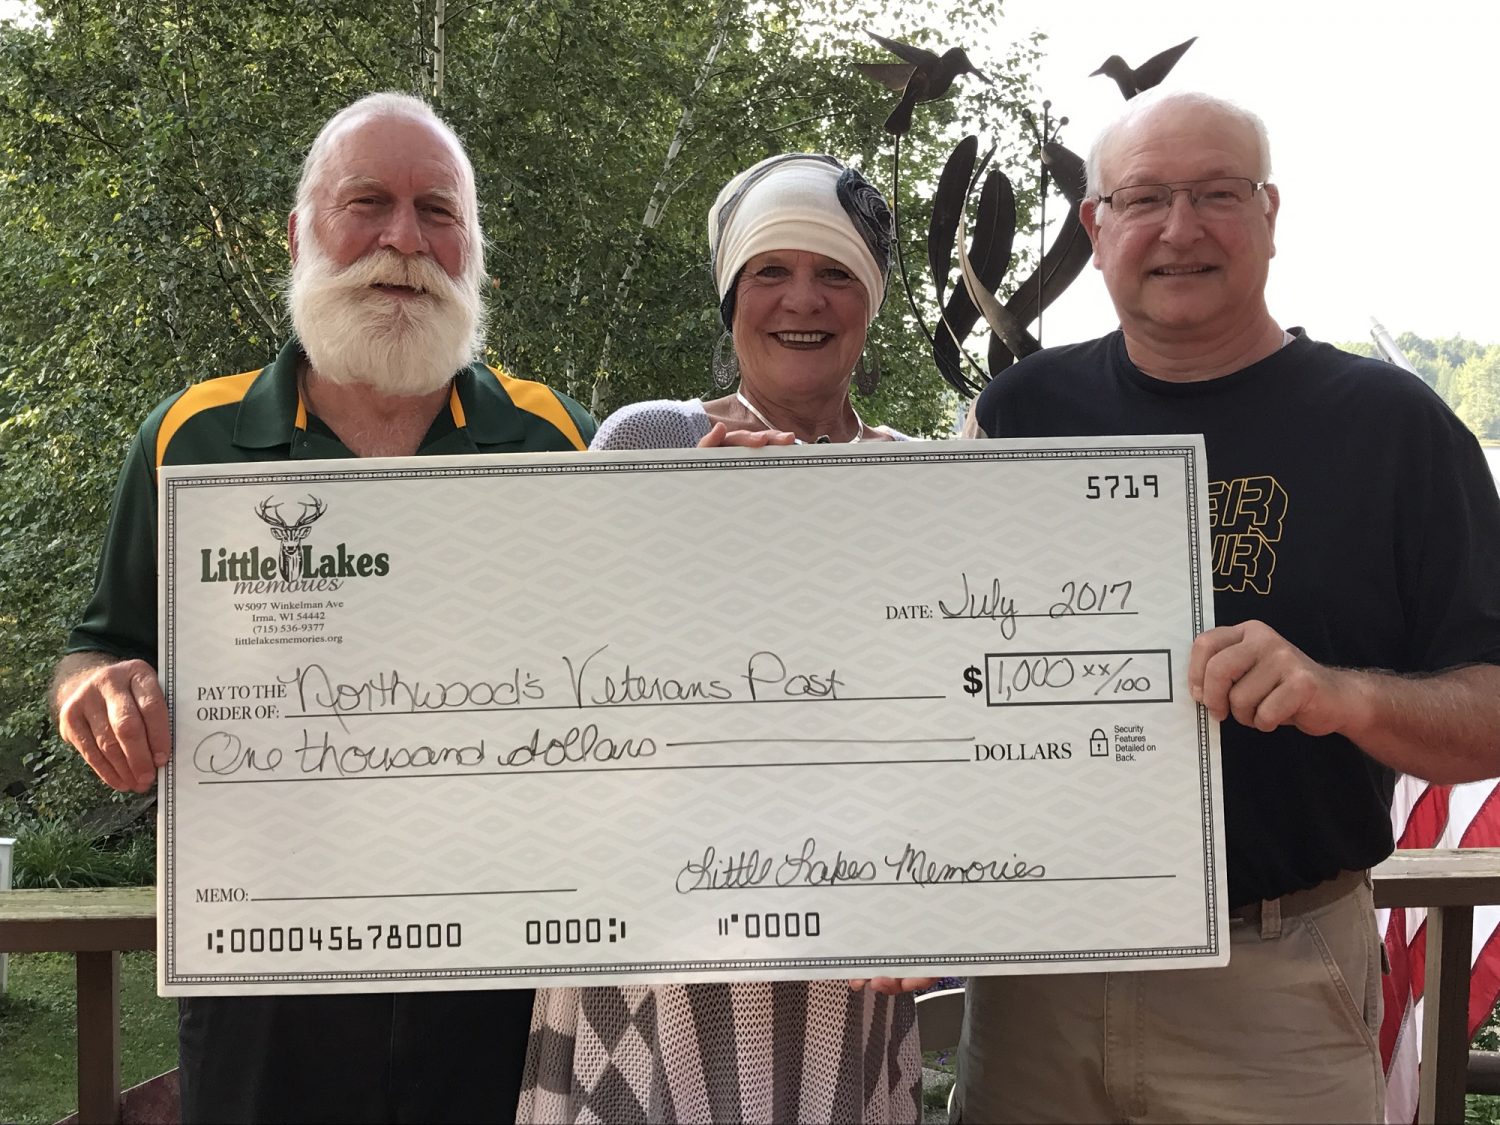 Little Lakes pitches in for Northwoods Veterans Post